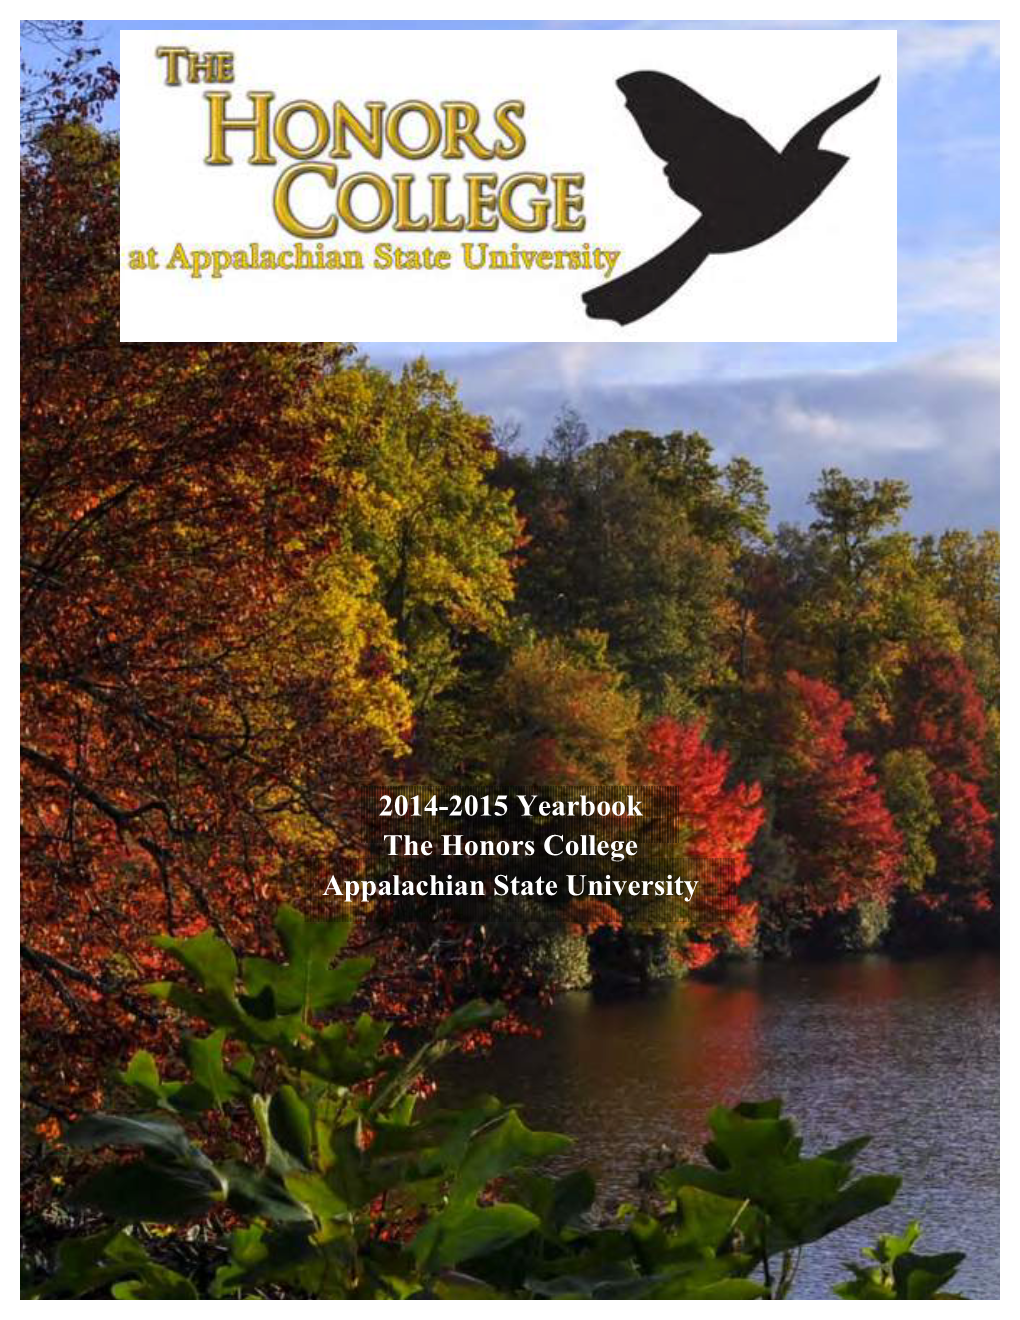 2014-2015 Yearbook the Honors College Appalachian State University